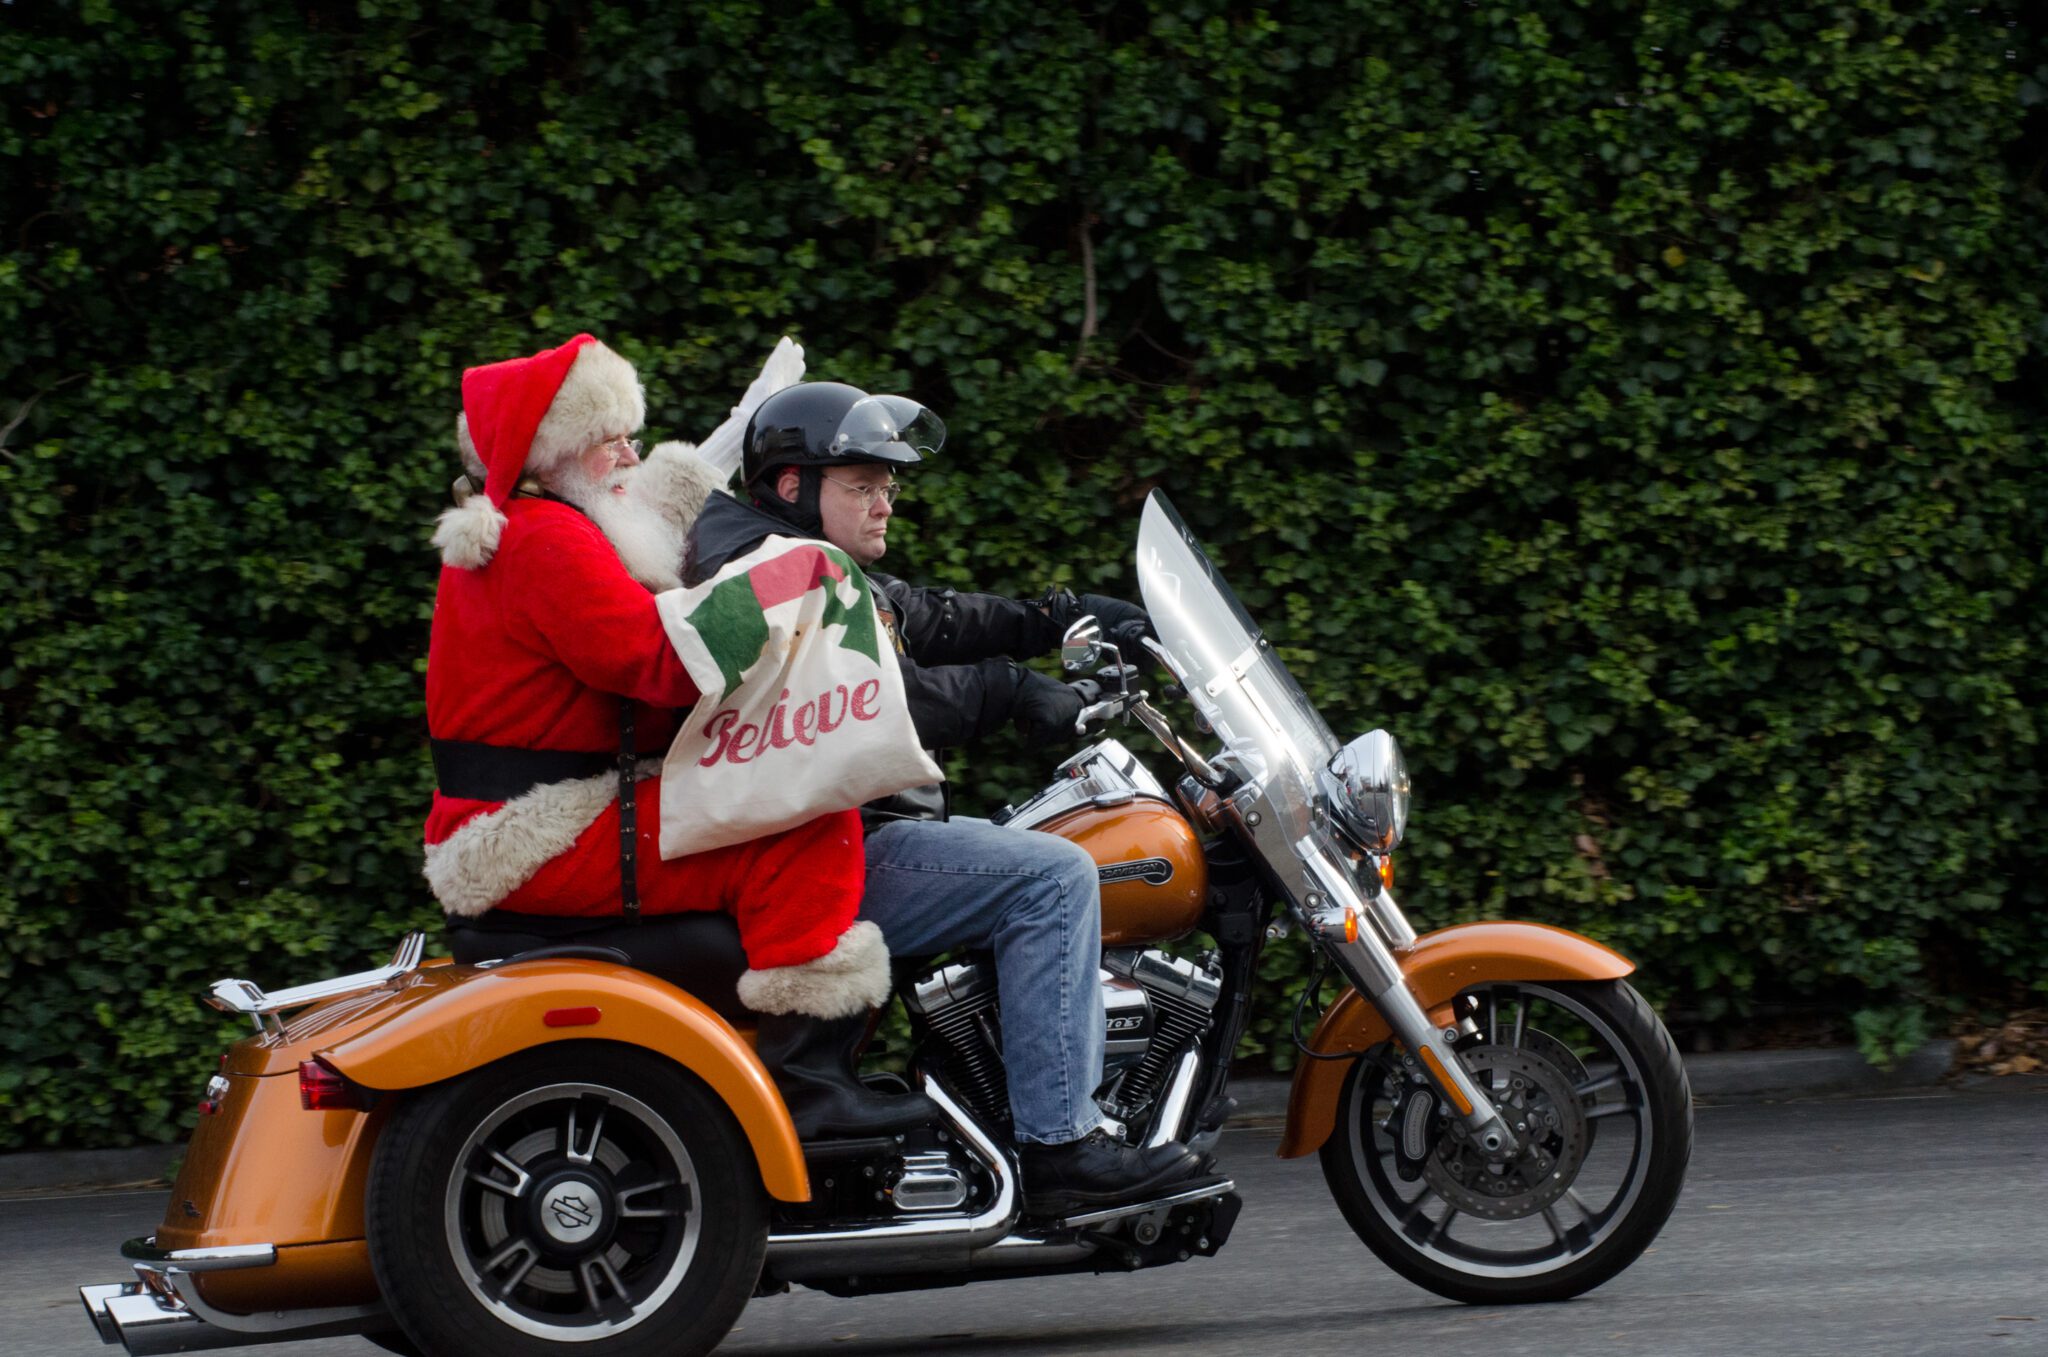 Santa on motorcycle arrives at Volta Park to meet the children Dec. 4 (Photo by: James Brantley)